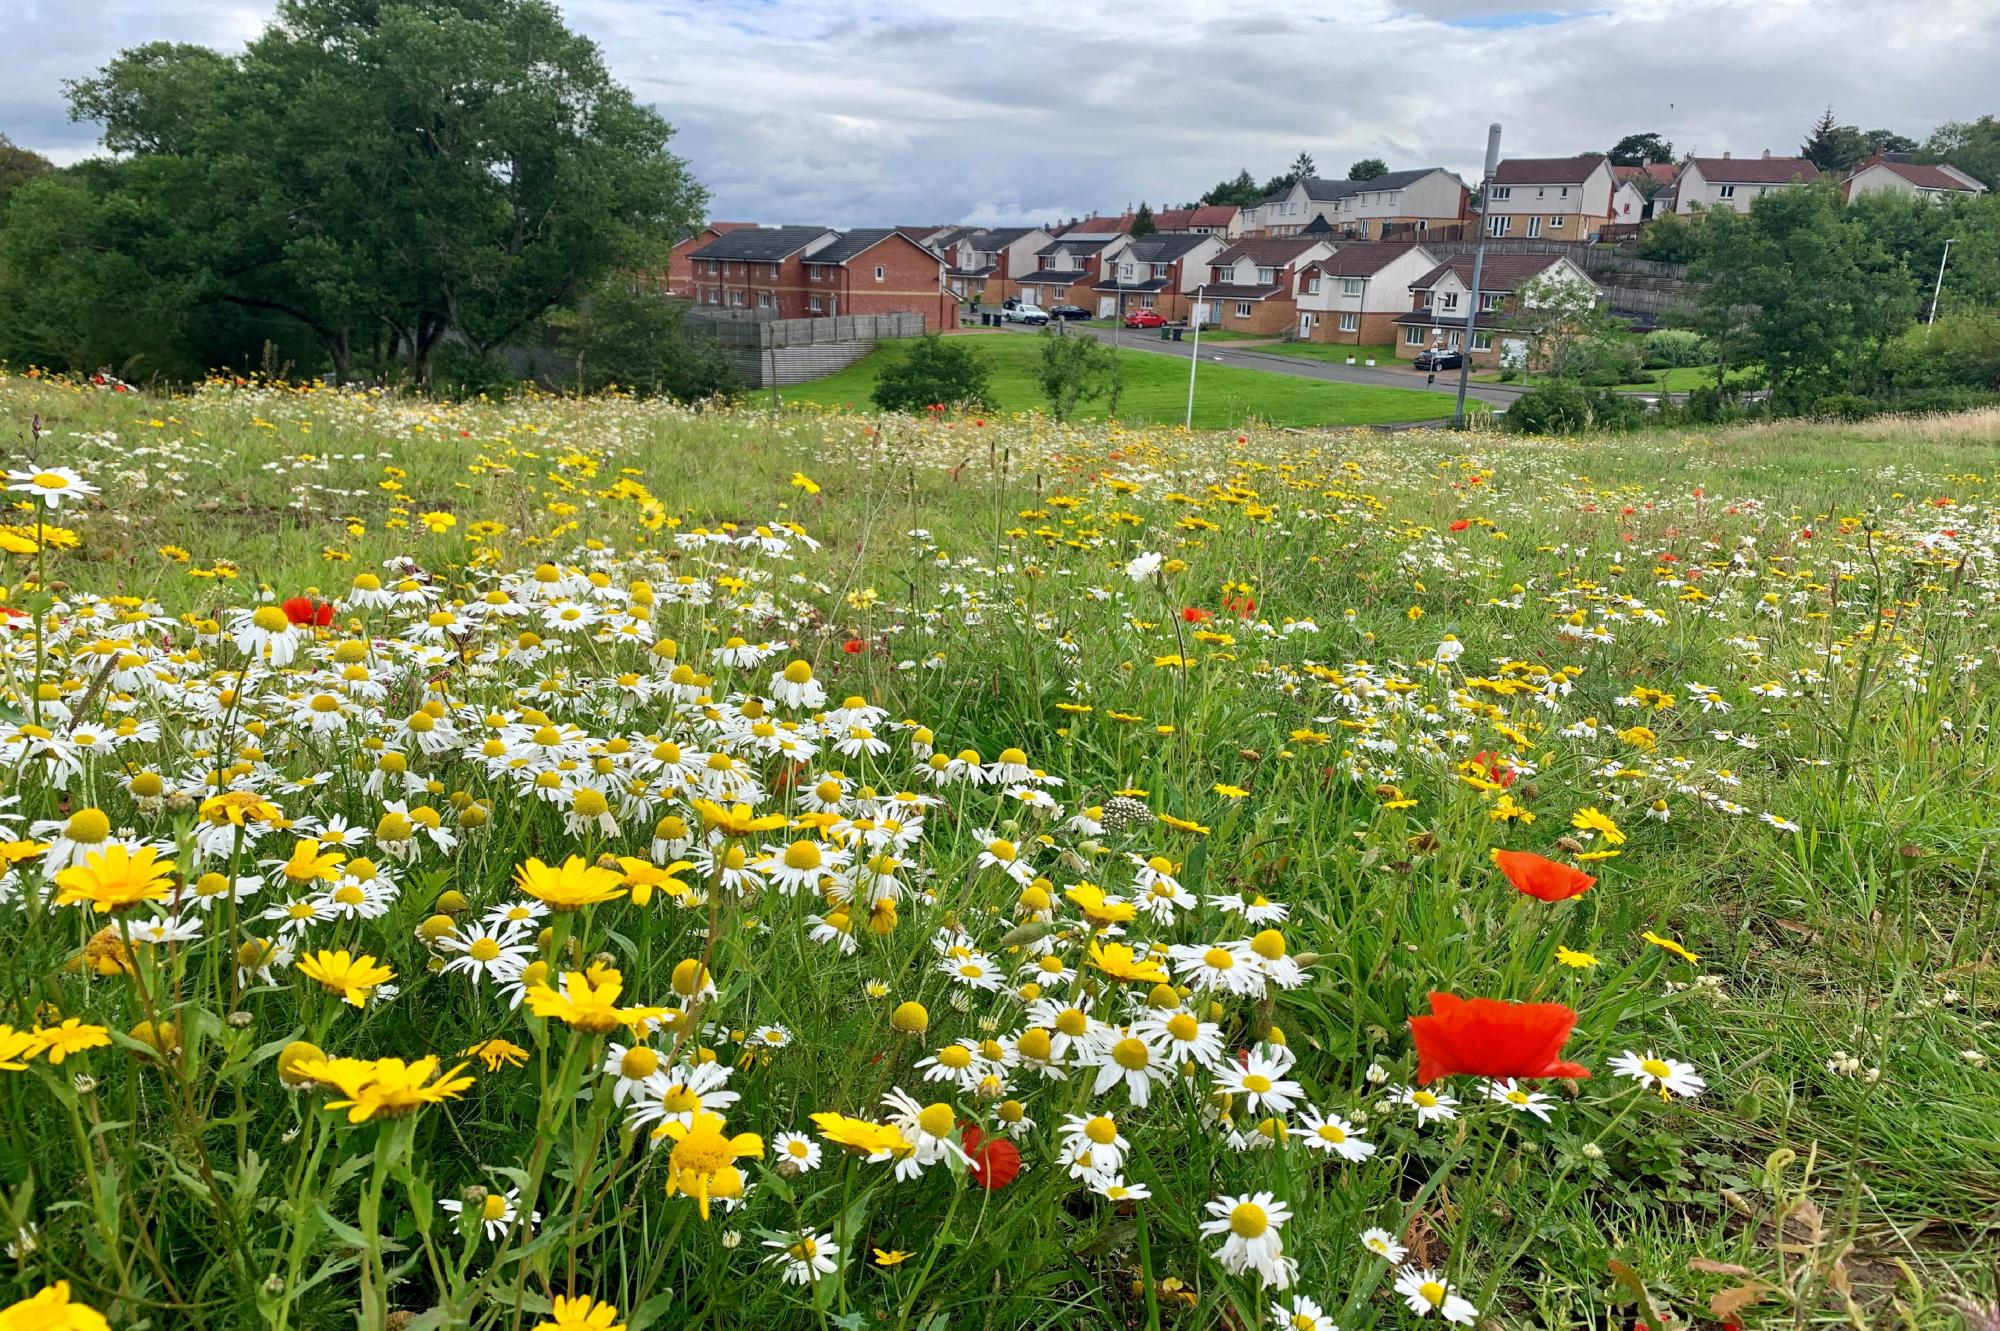 Meadow of flowers in foreground with residential houses behind.